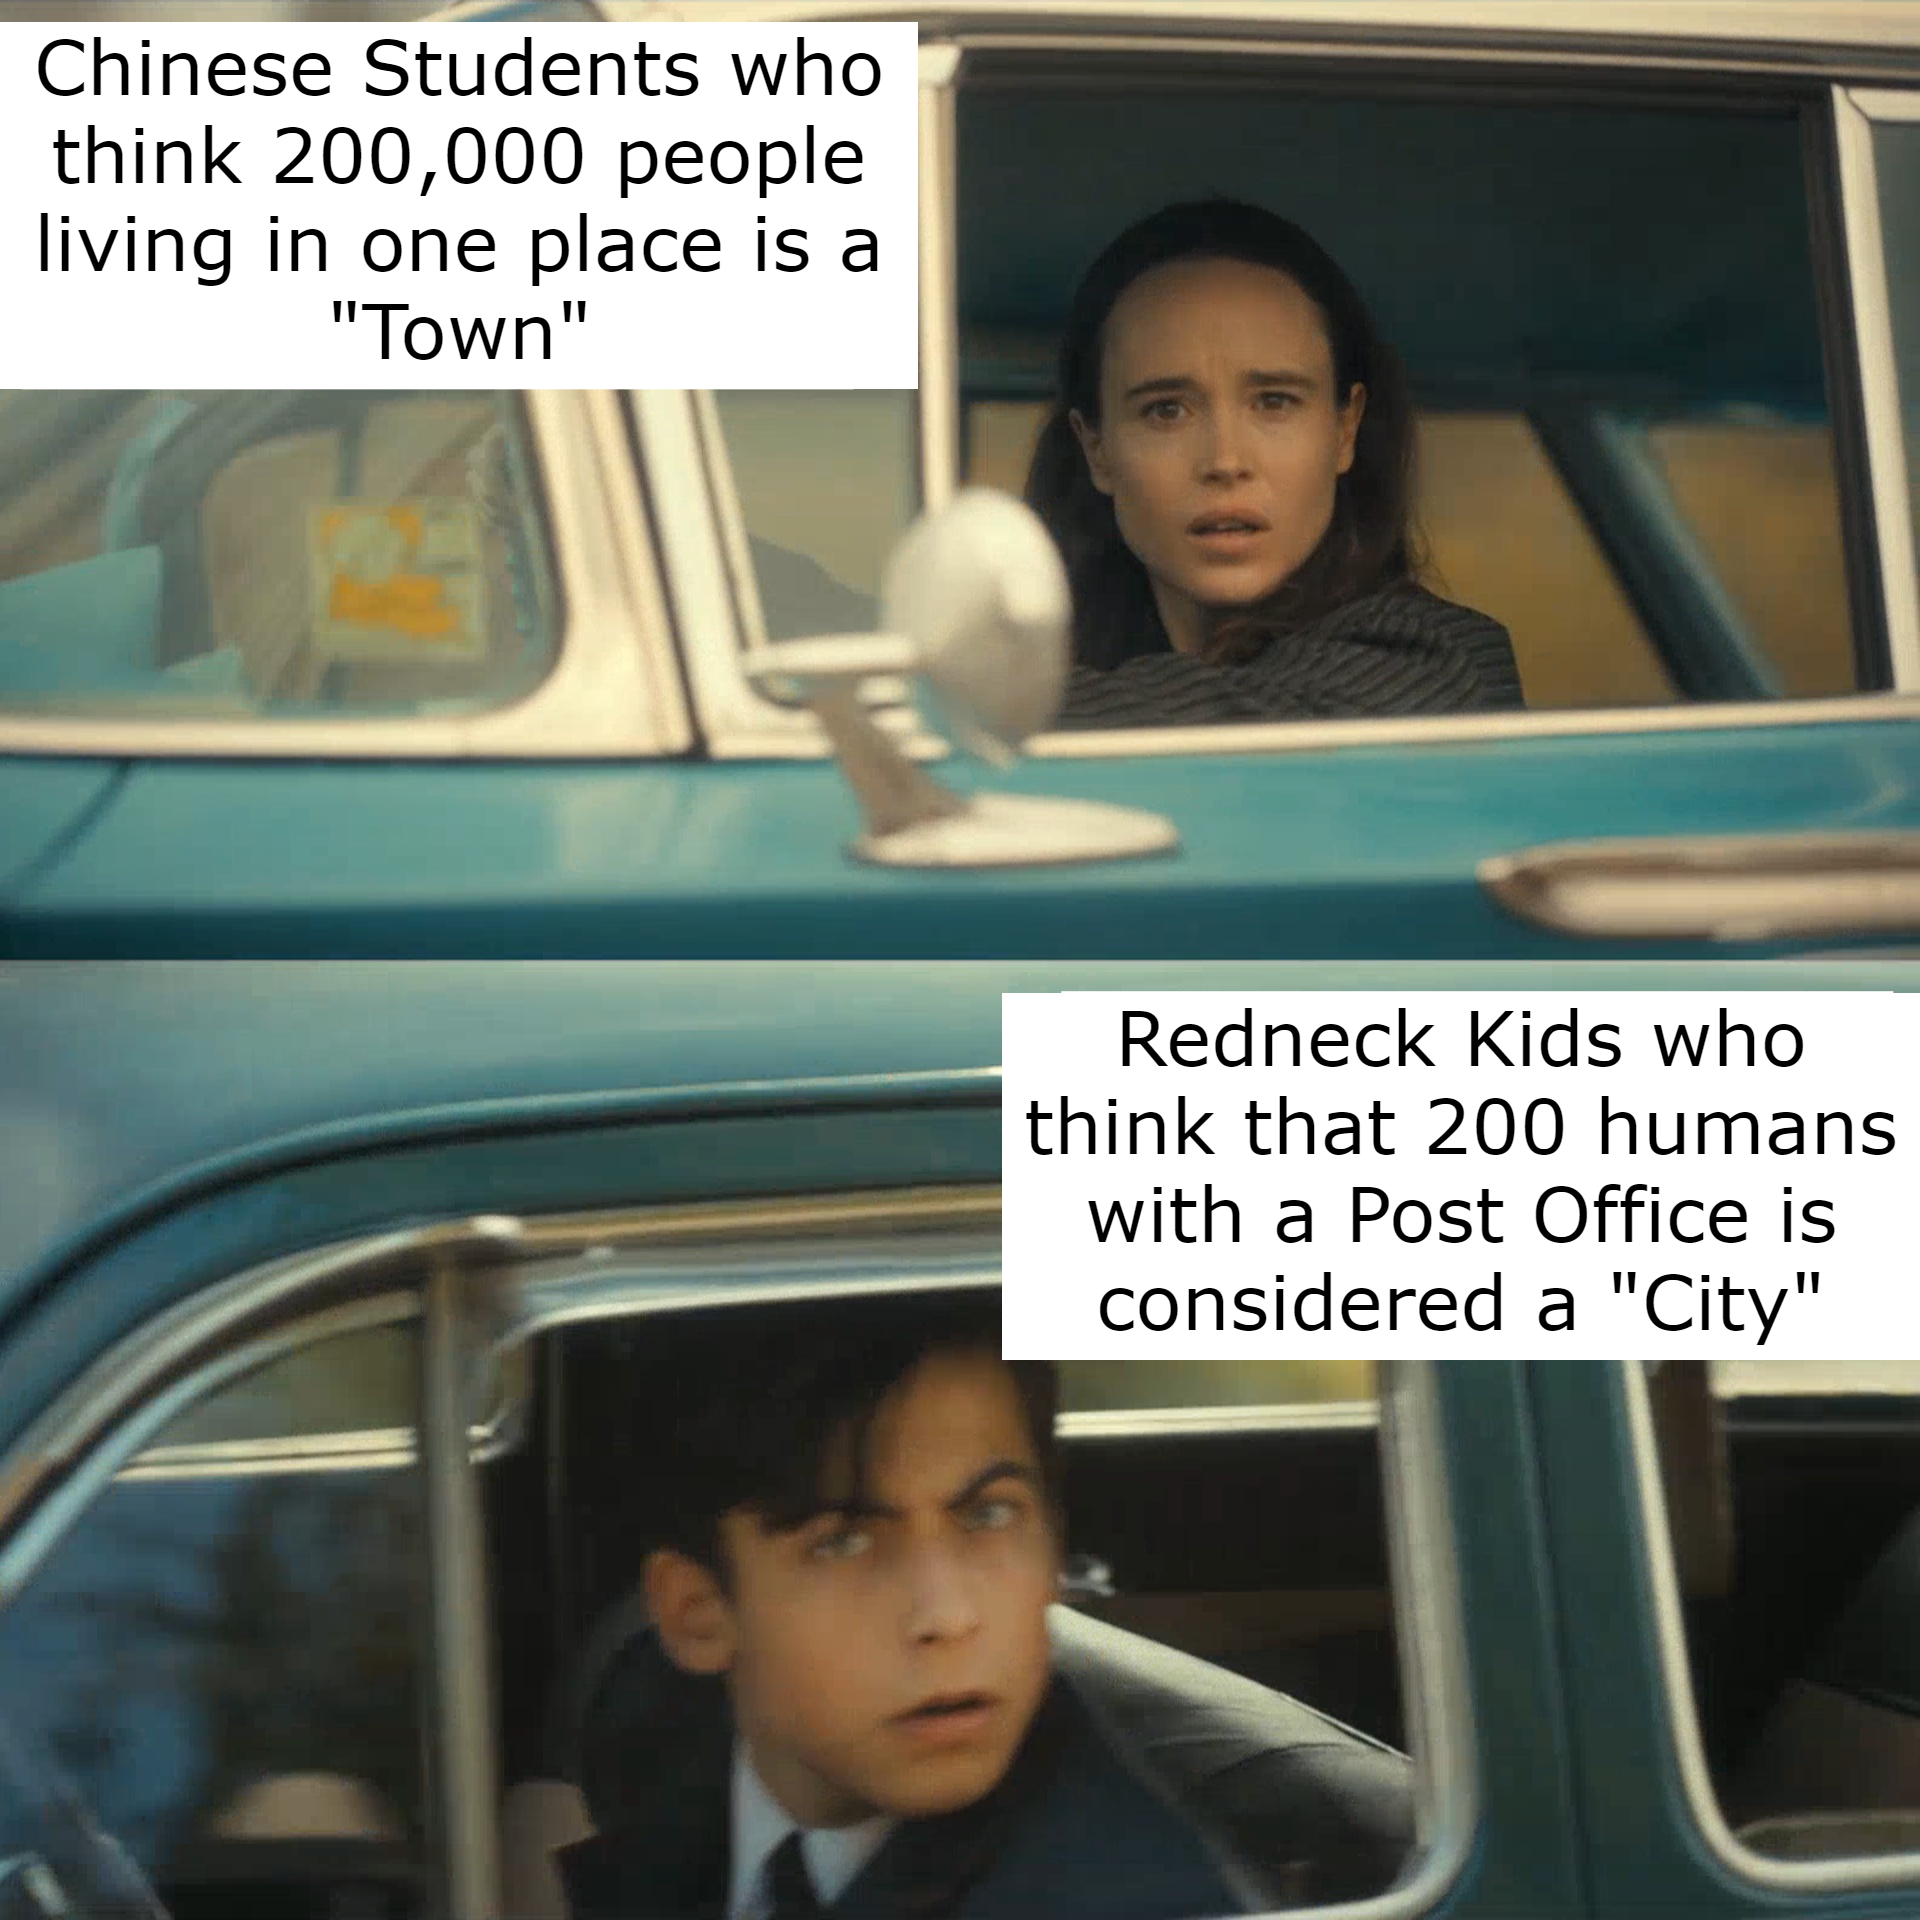 dank memes - funny memes - umbrella academy meme - Chinese Students who think 200,000 people living in one place is a "Town" Redneck Kids who think that 200 humans with a Post Office is considered a "City"